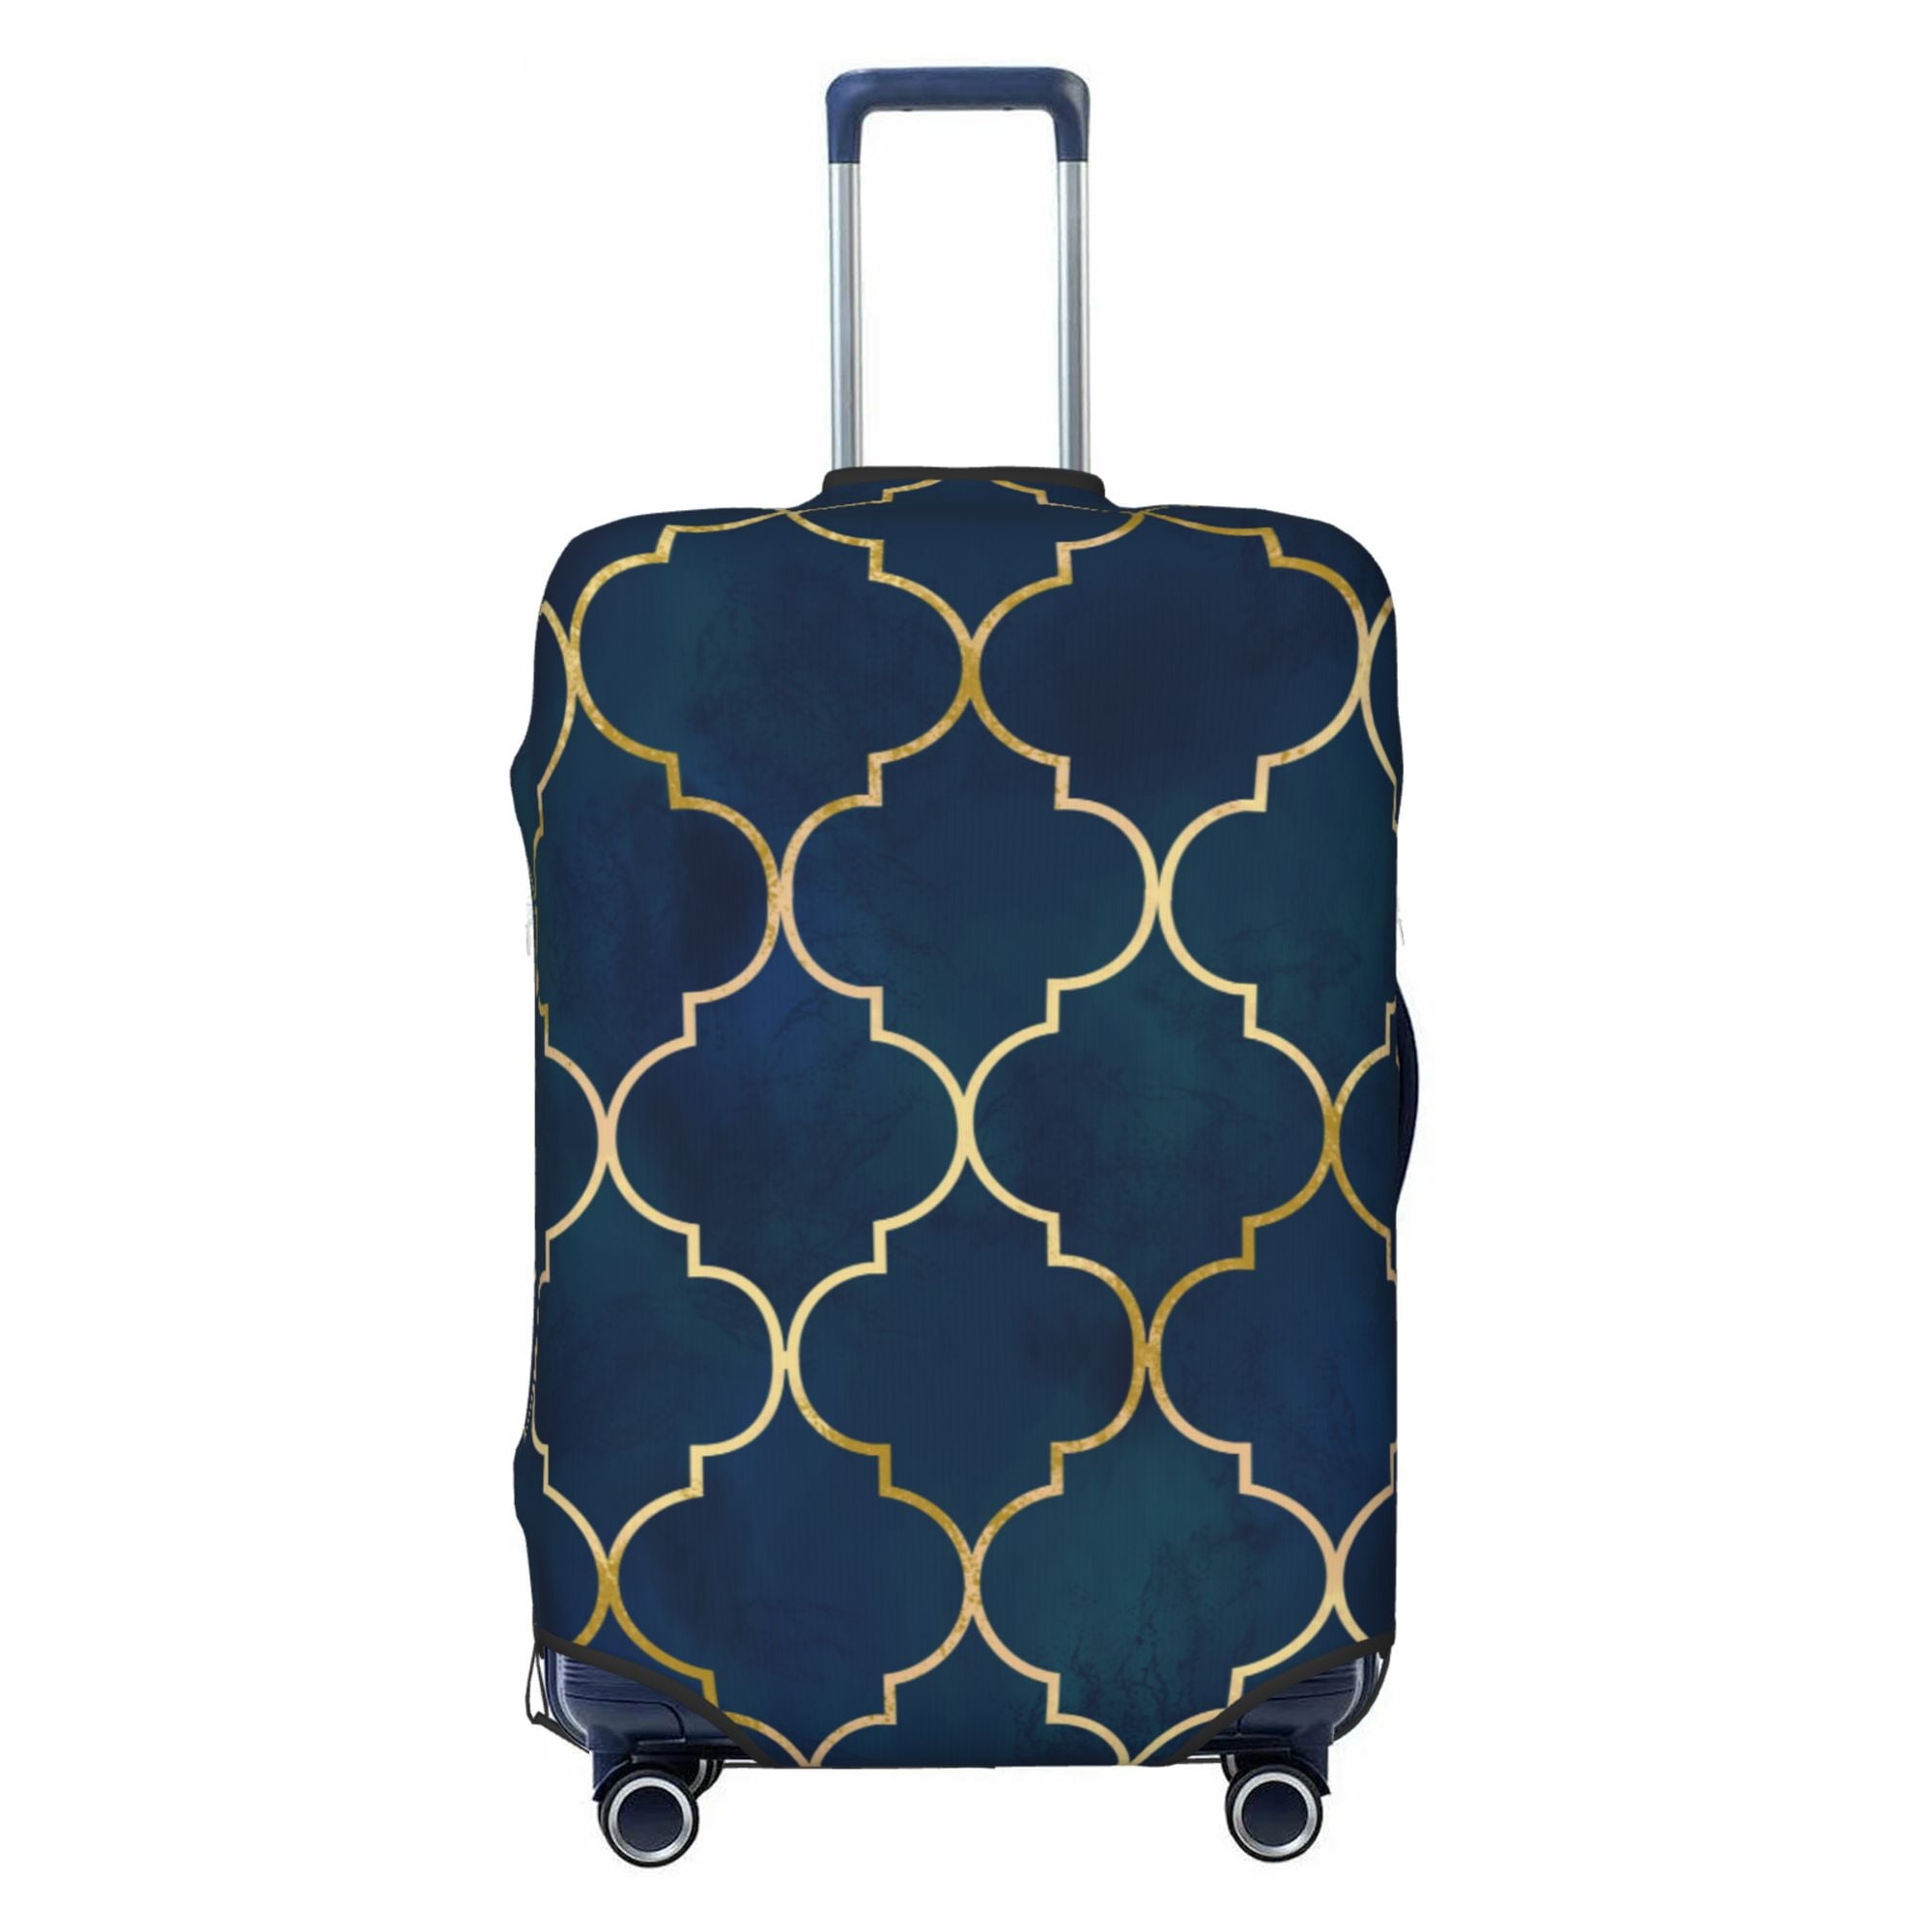 TEQUAN Polyester Elastic Luggage Cover, Morocco Style Minimalism Blue ...